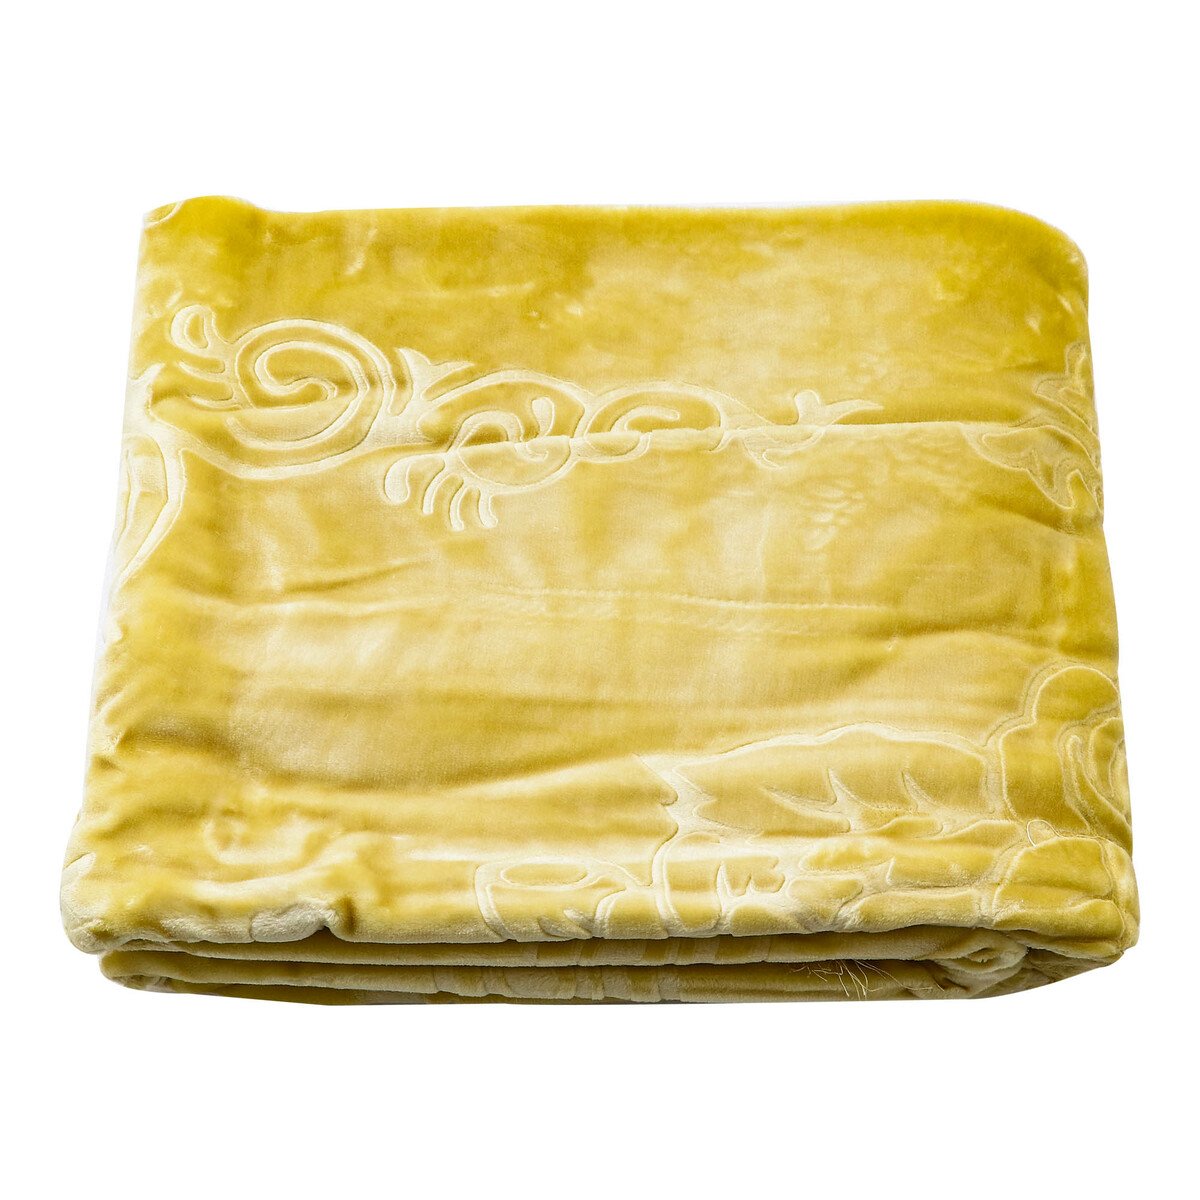 Adora Blanket, Bed Cover, Pillow Case Embossed 4Pc Set Assorted